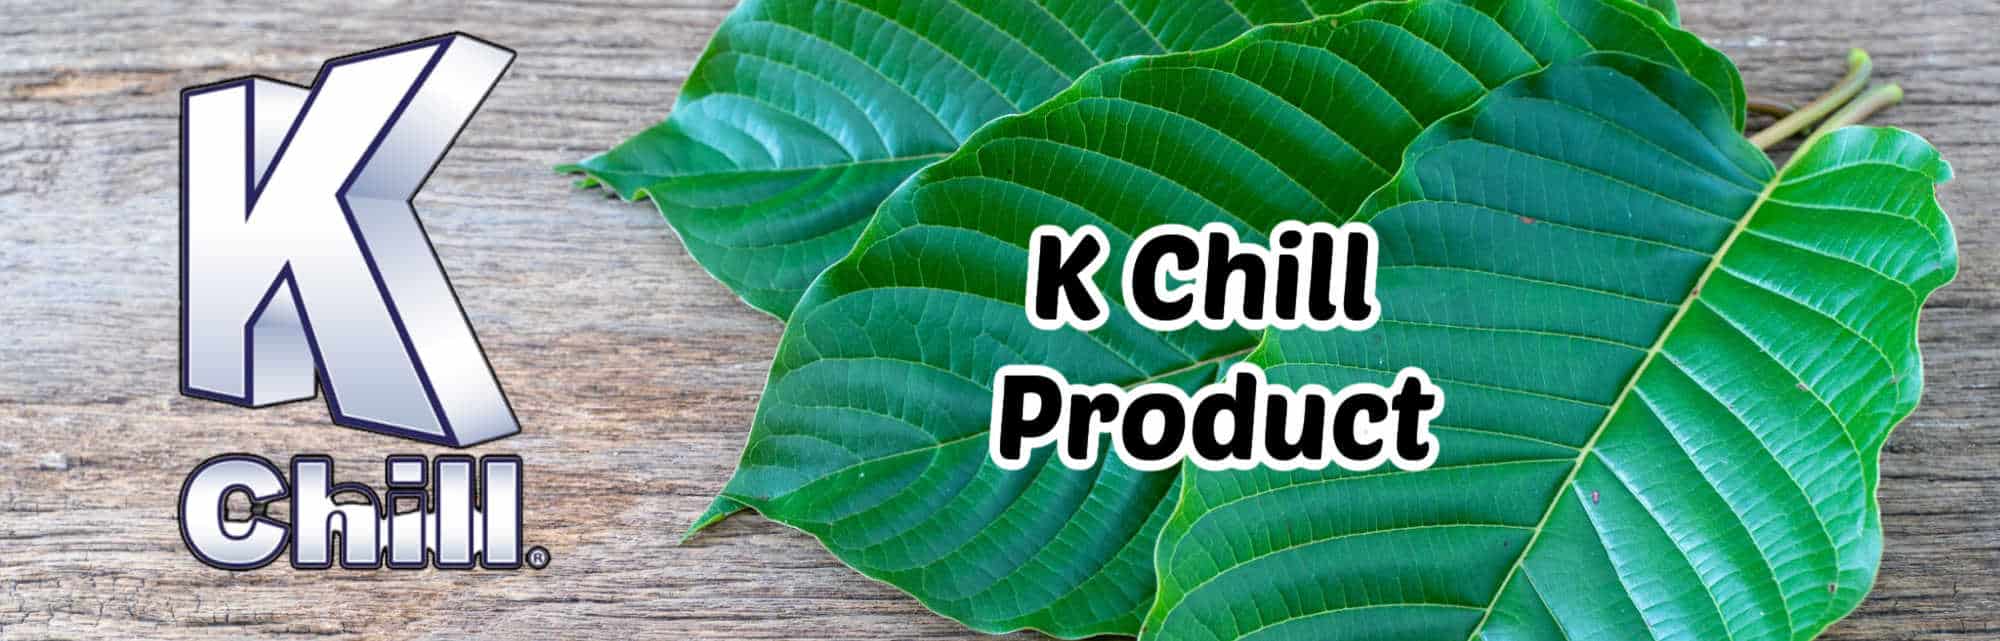 image of k chill products